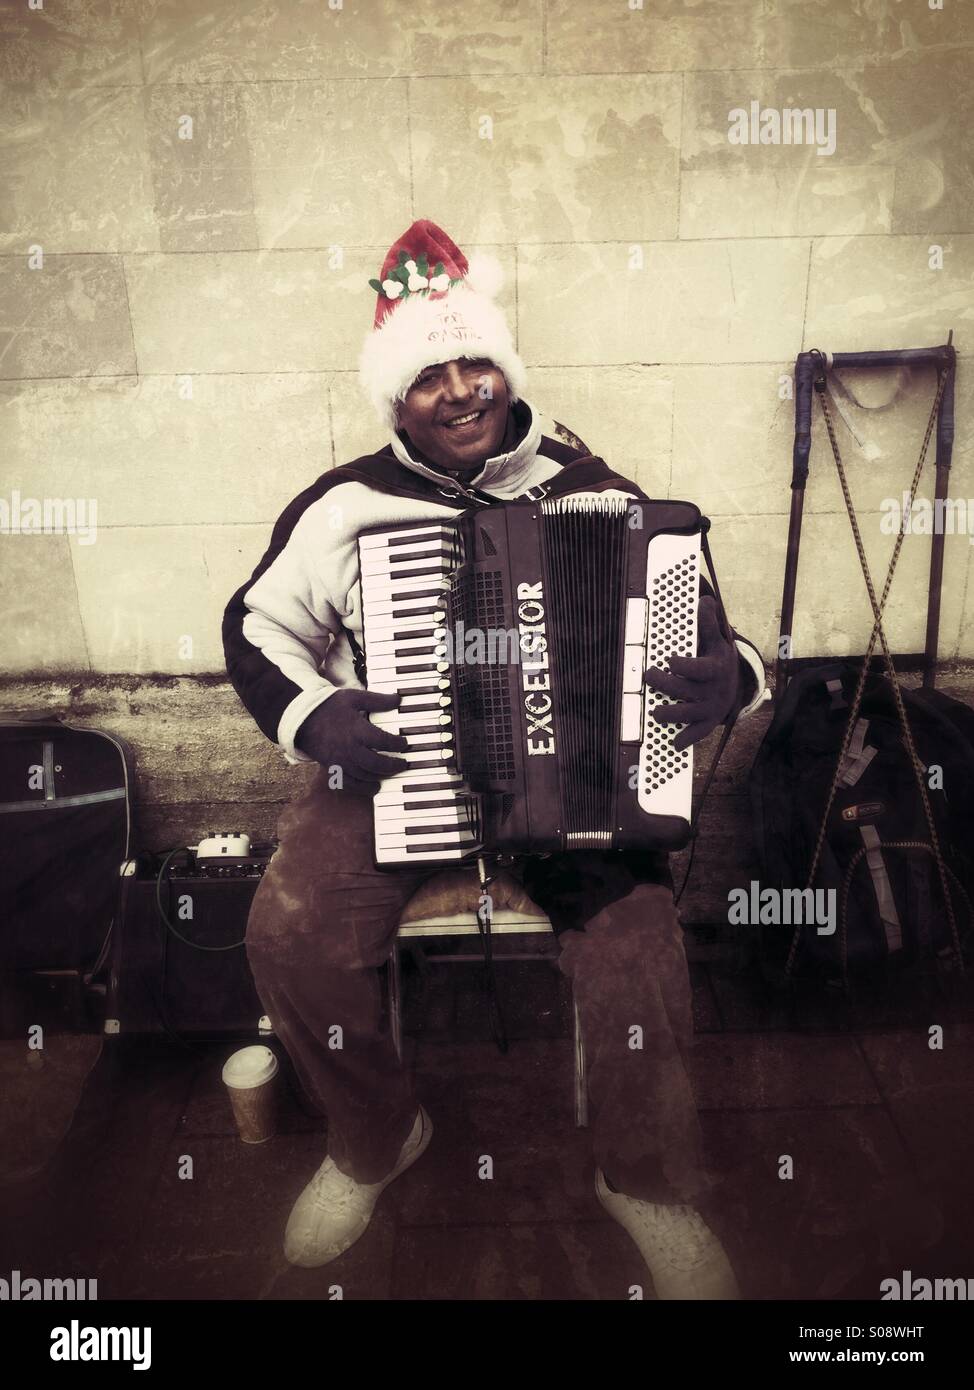 A happy accordionist in festive clothing entertains shoppers in Epping, Essex Stock Photo